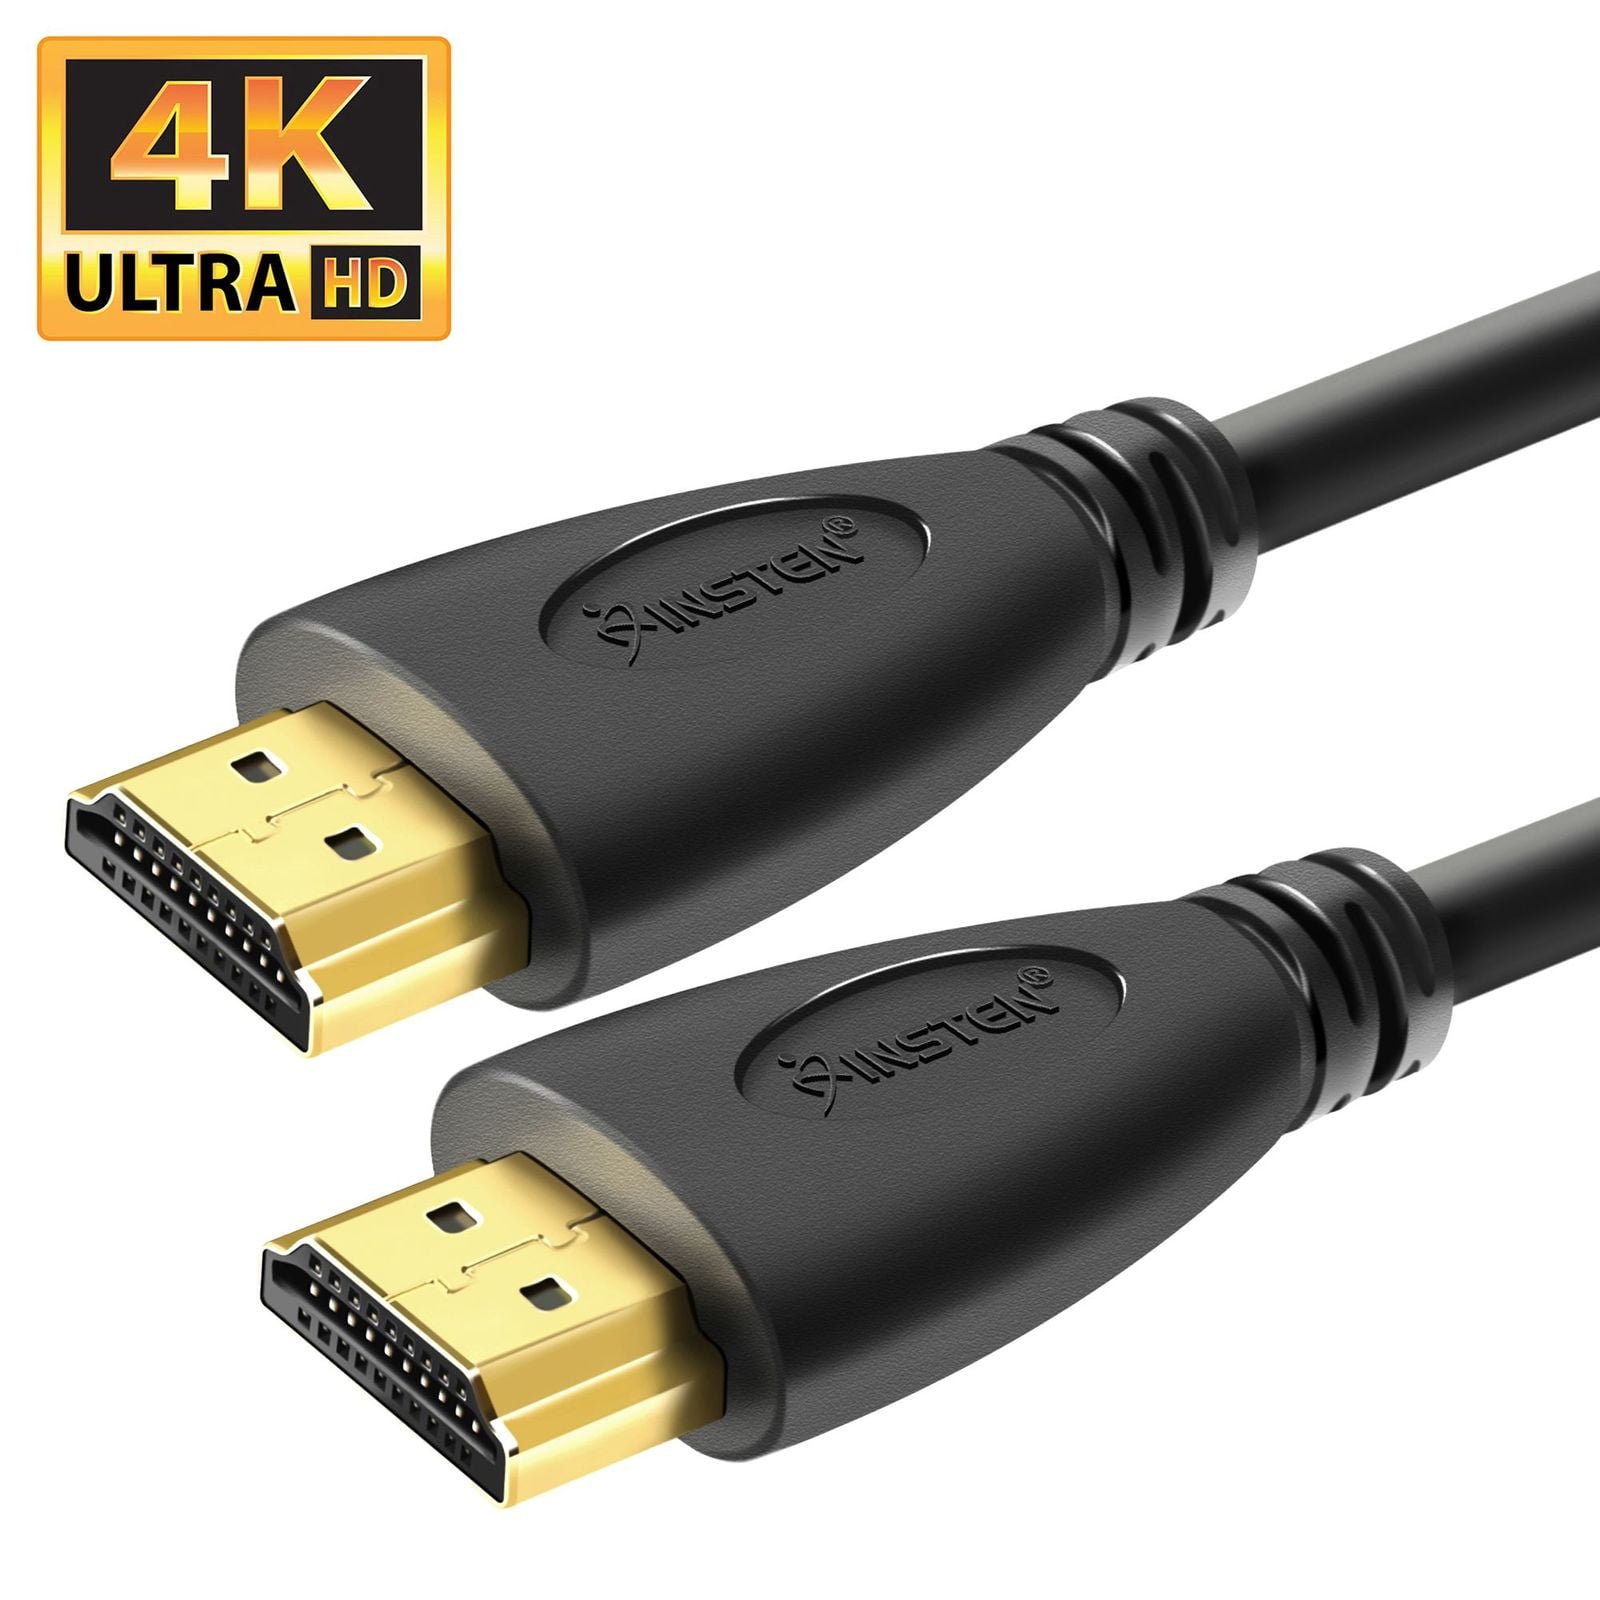 Flat HDMI Cable 1080p High Speed Gold Plated HDMI AV TV HDTV LCD LED SKY HD 3D 